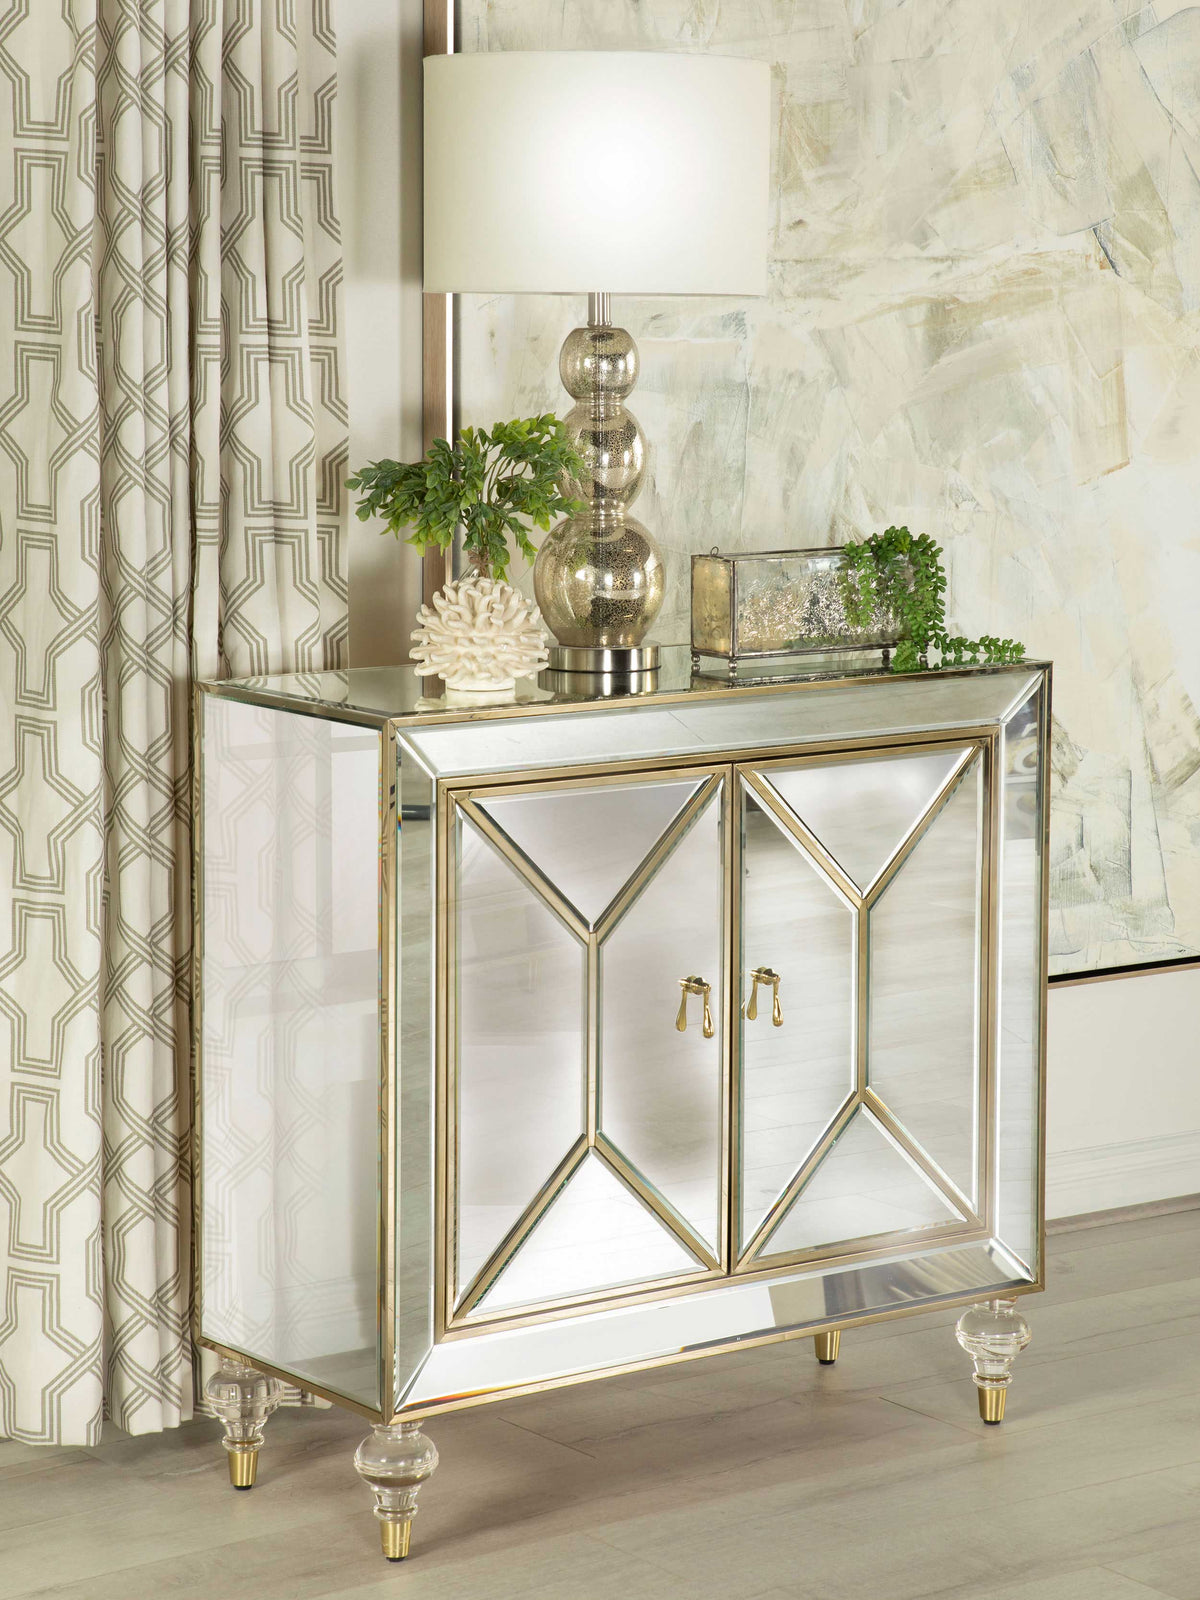 Lupin 2-door Accent Cabinet Mirror and Champagne Lupin 2-door Accent Cabinet Mirror and Champagne Half Price Furniture